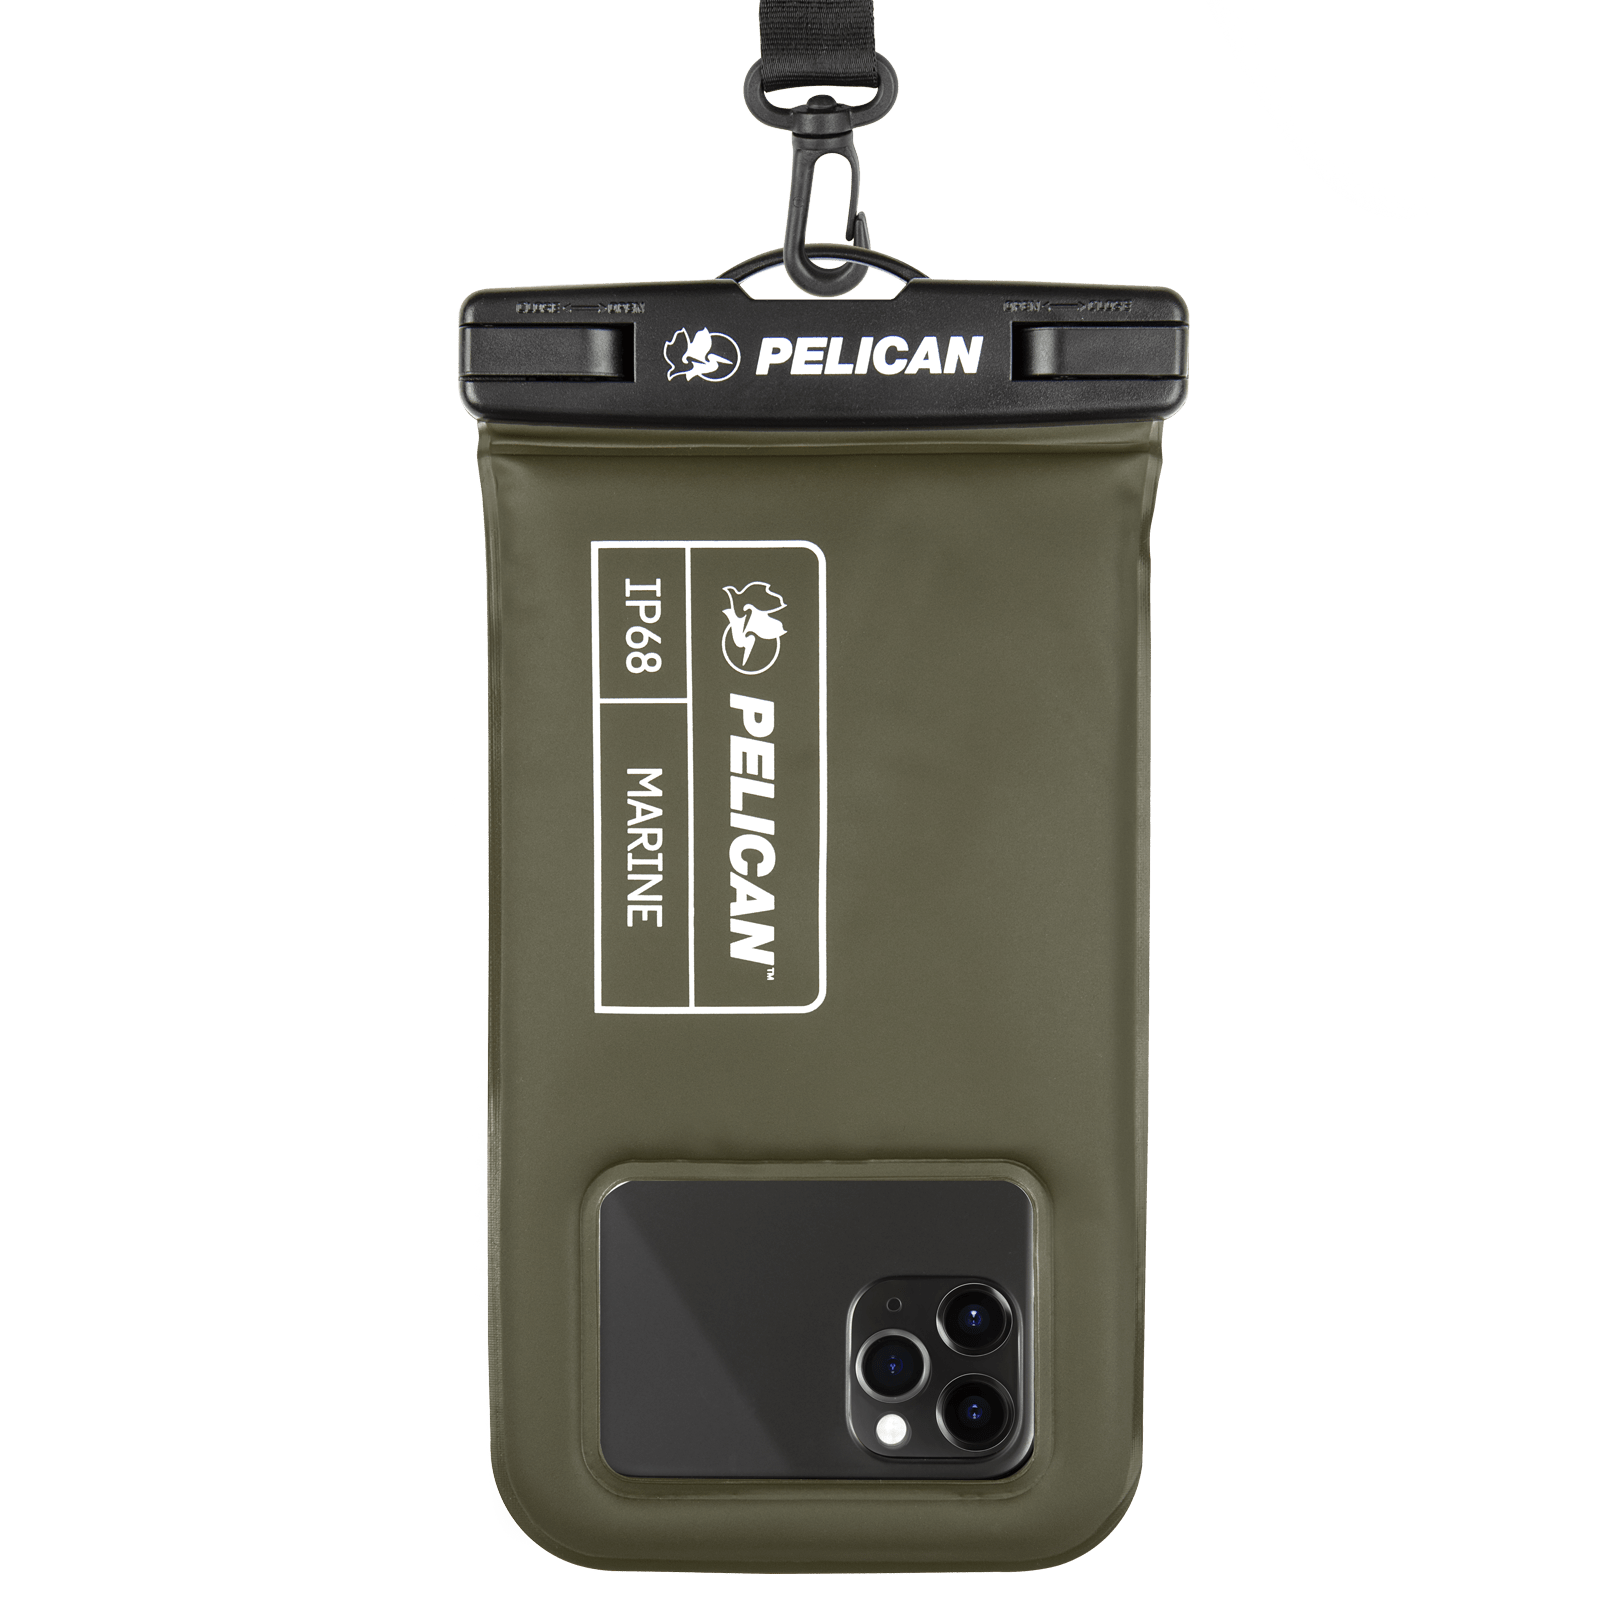 Pelican Marine Waterproof Floating Pouch (Olive Green) - Phone Pouch